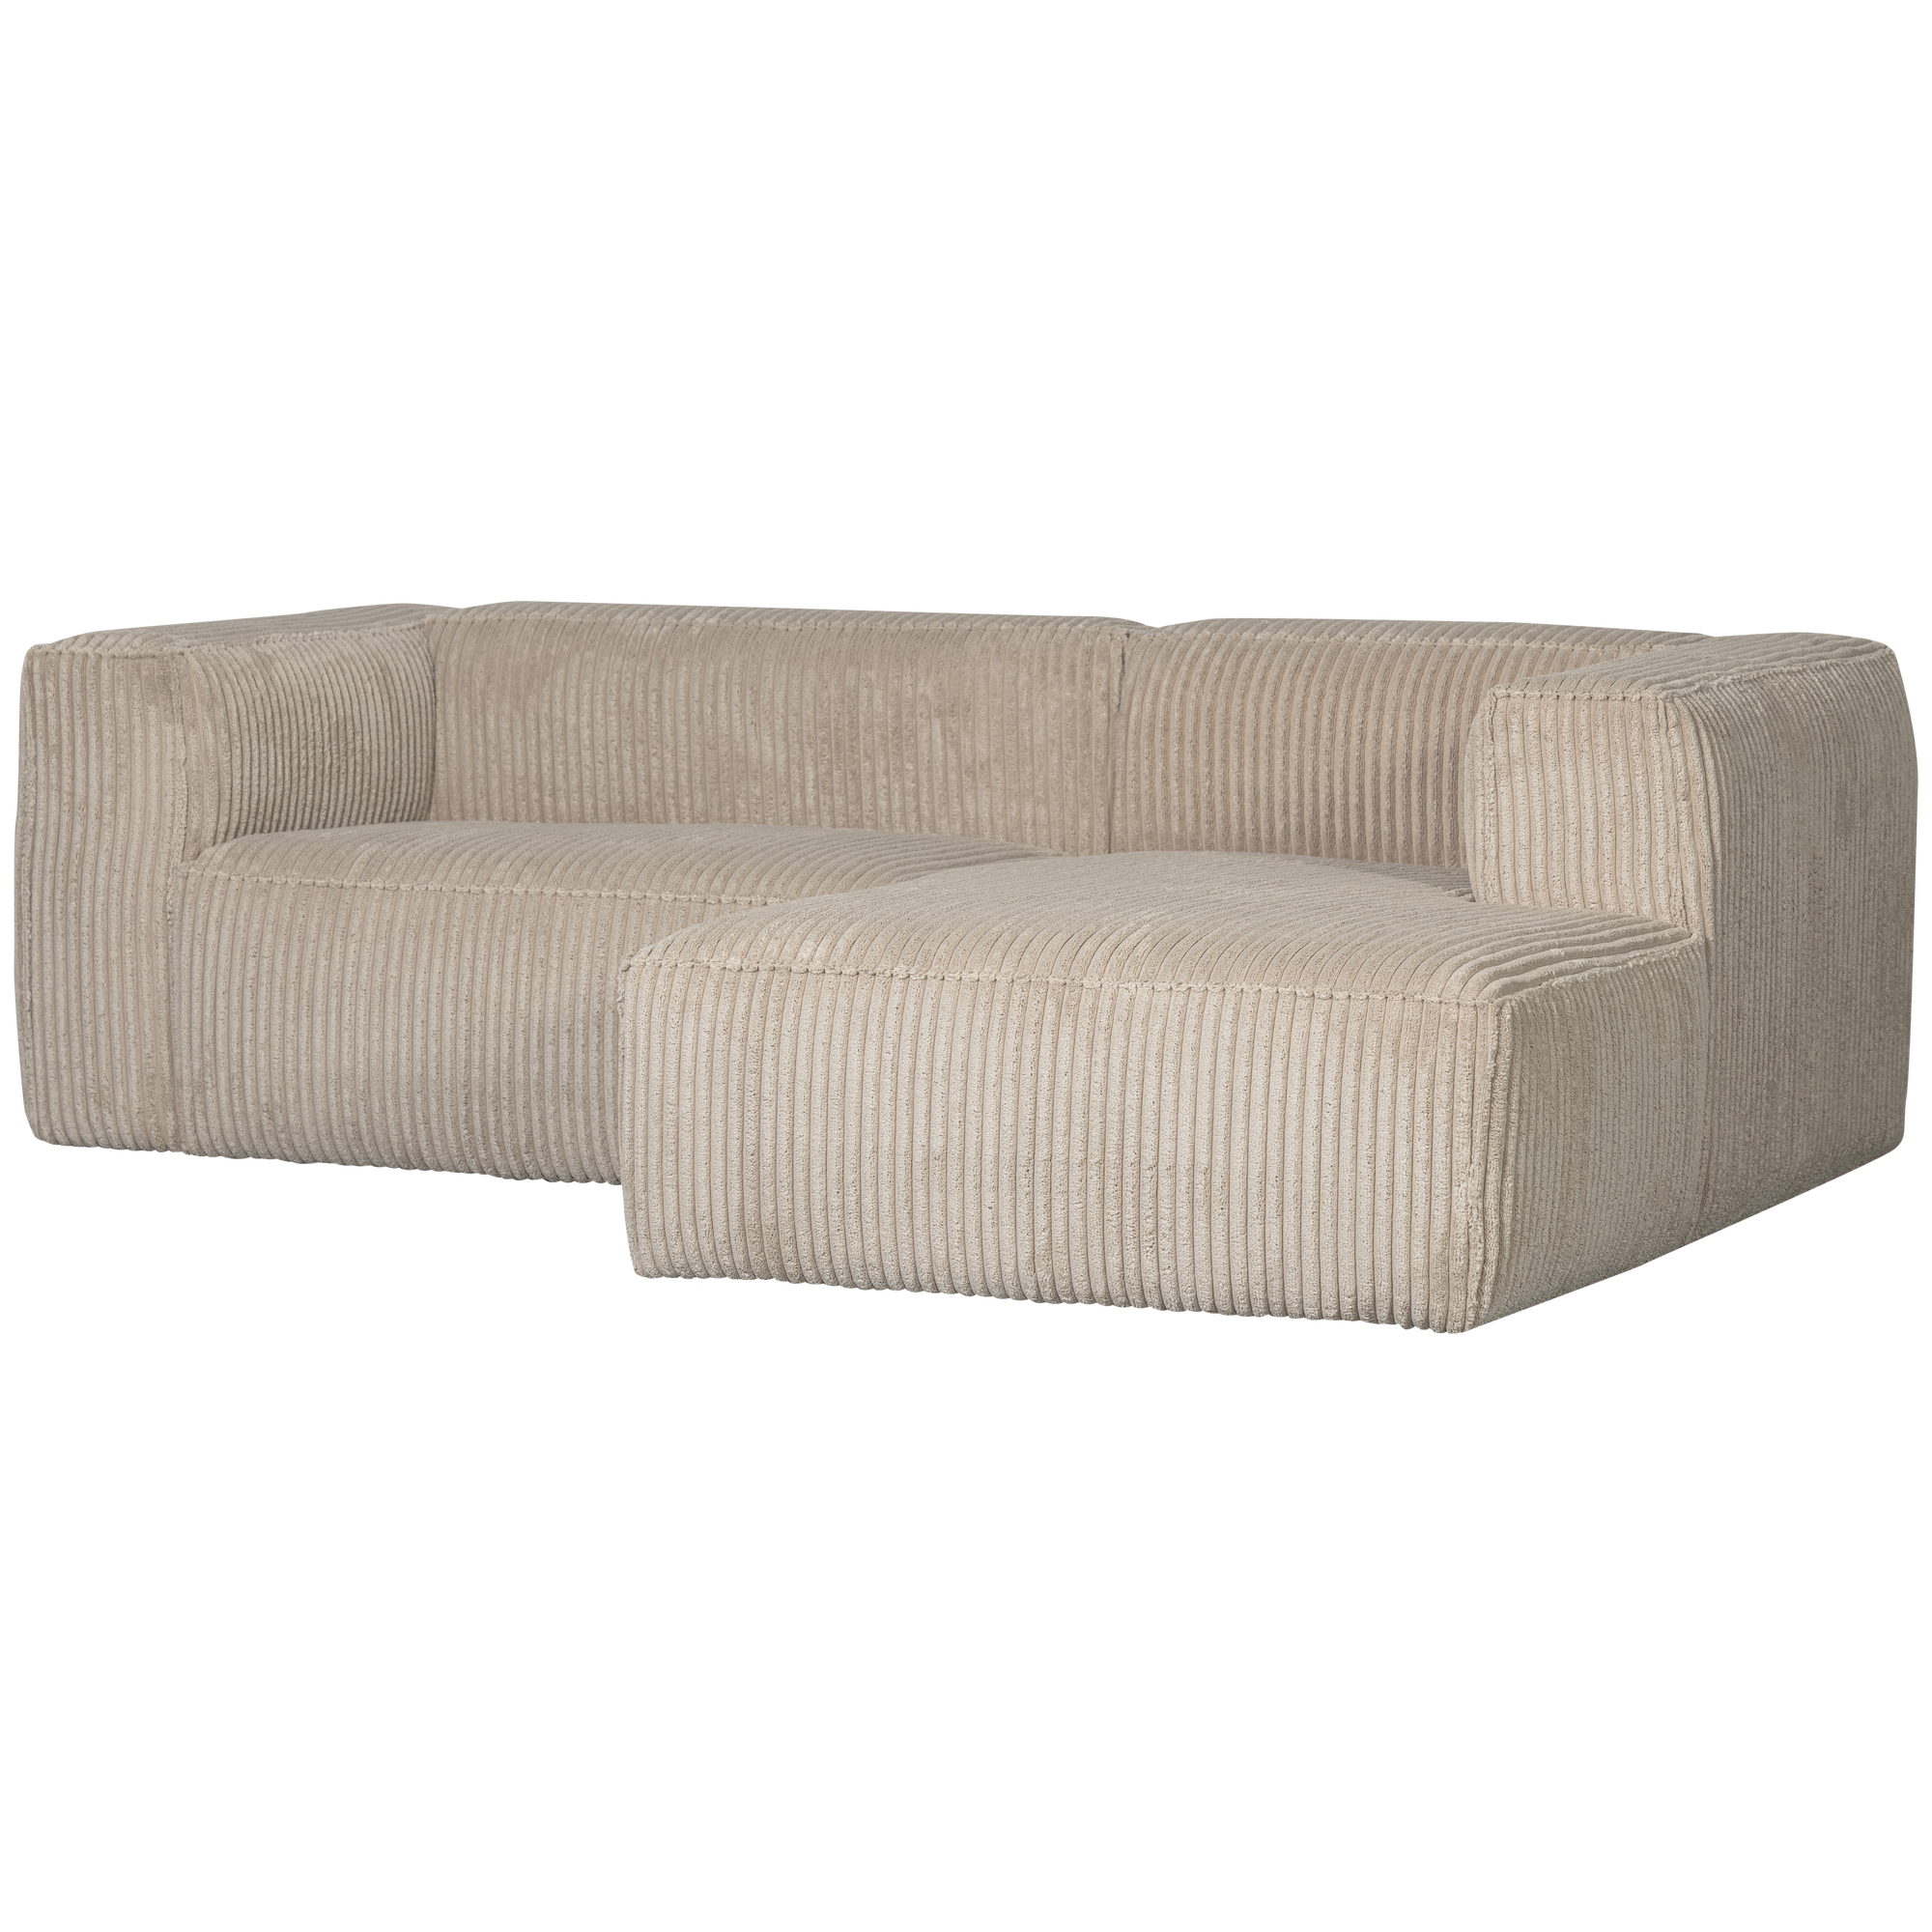 377433-RR-02_VS_WE_Bean_chaise_longue_links_grove_ribstof_travertin_SA.png?auto=webp&format=png&width=2000&height=2000